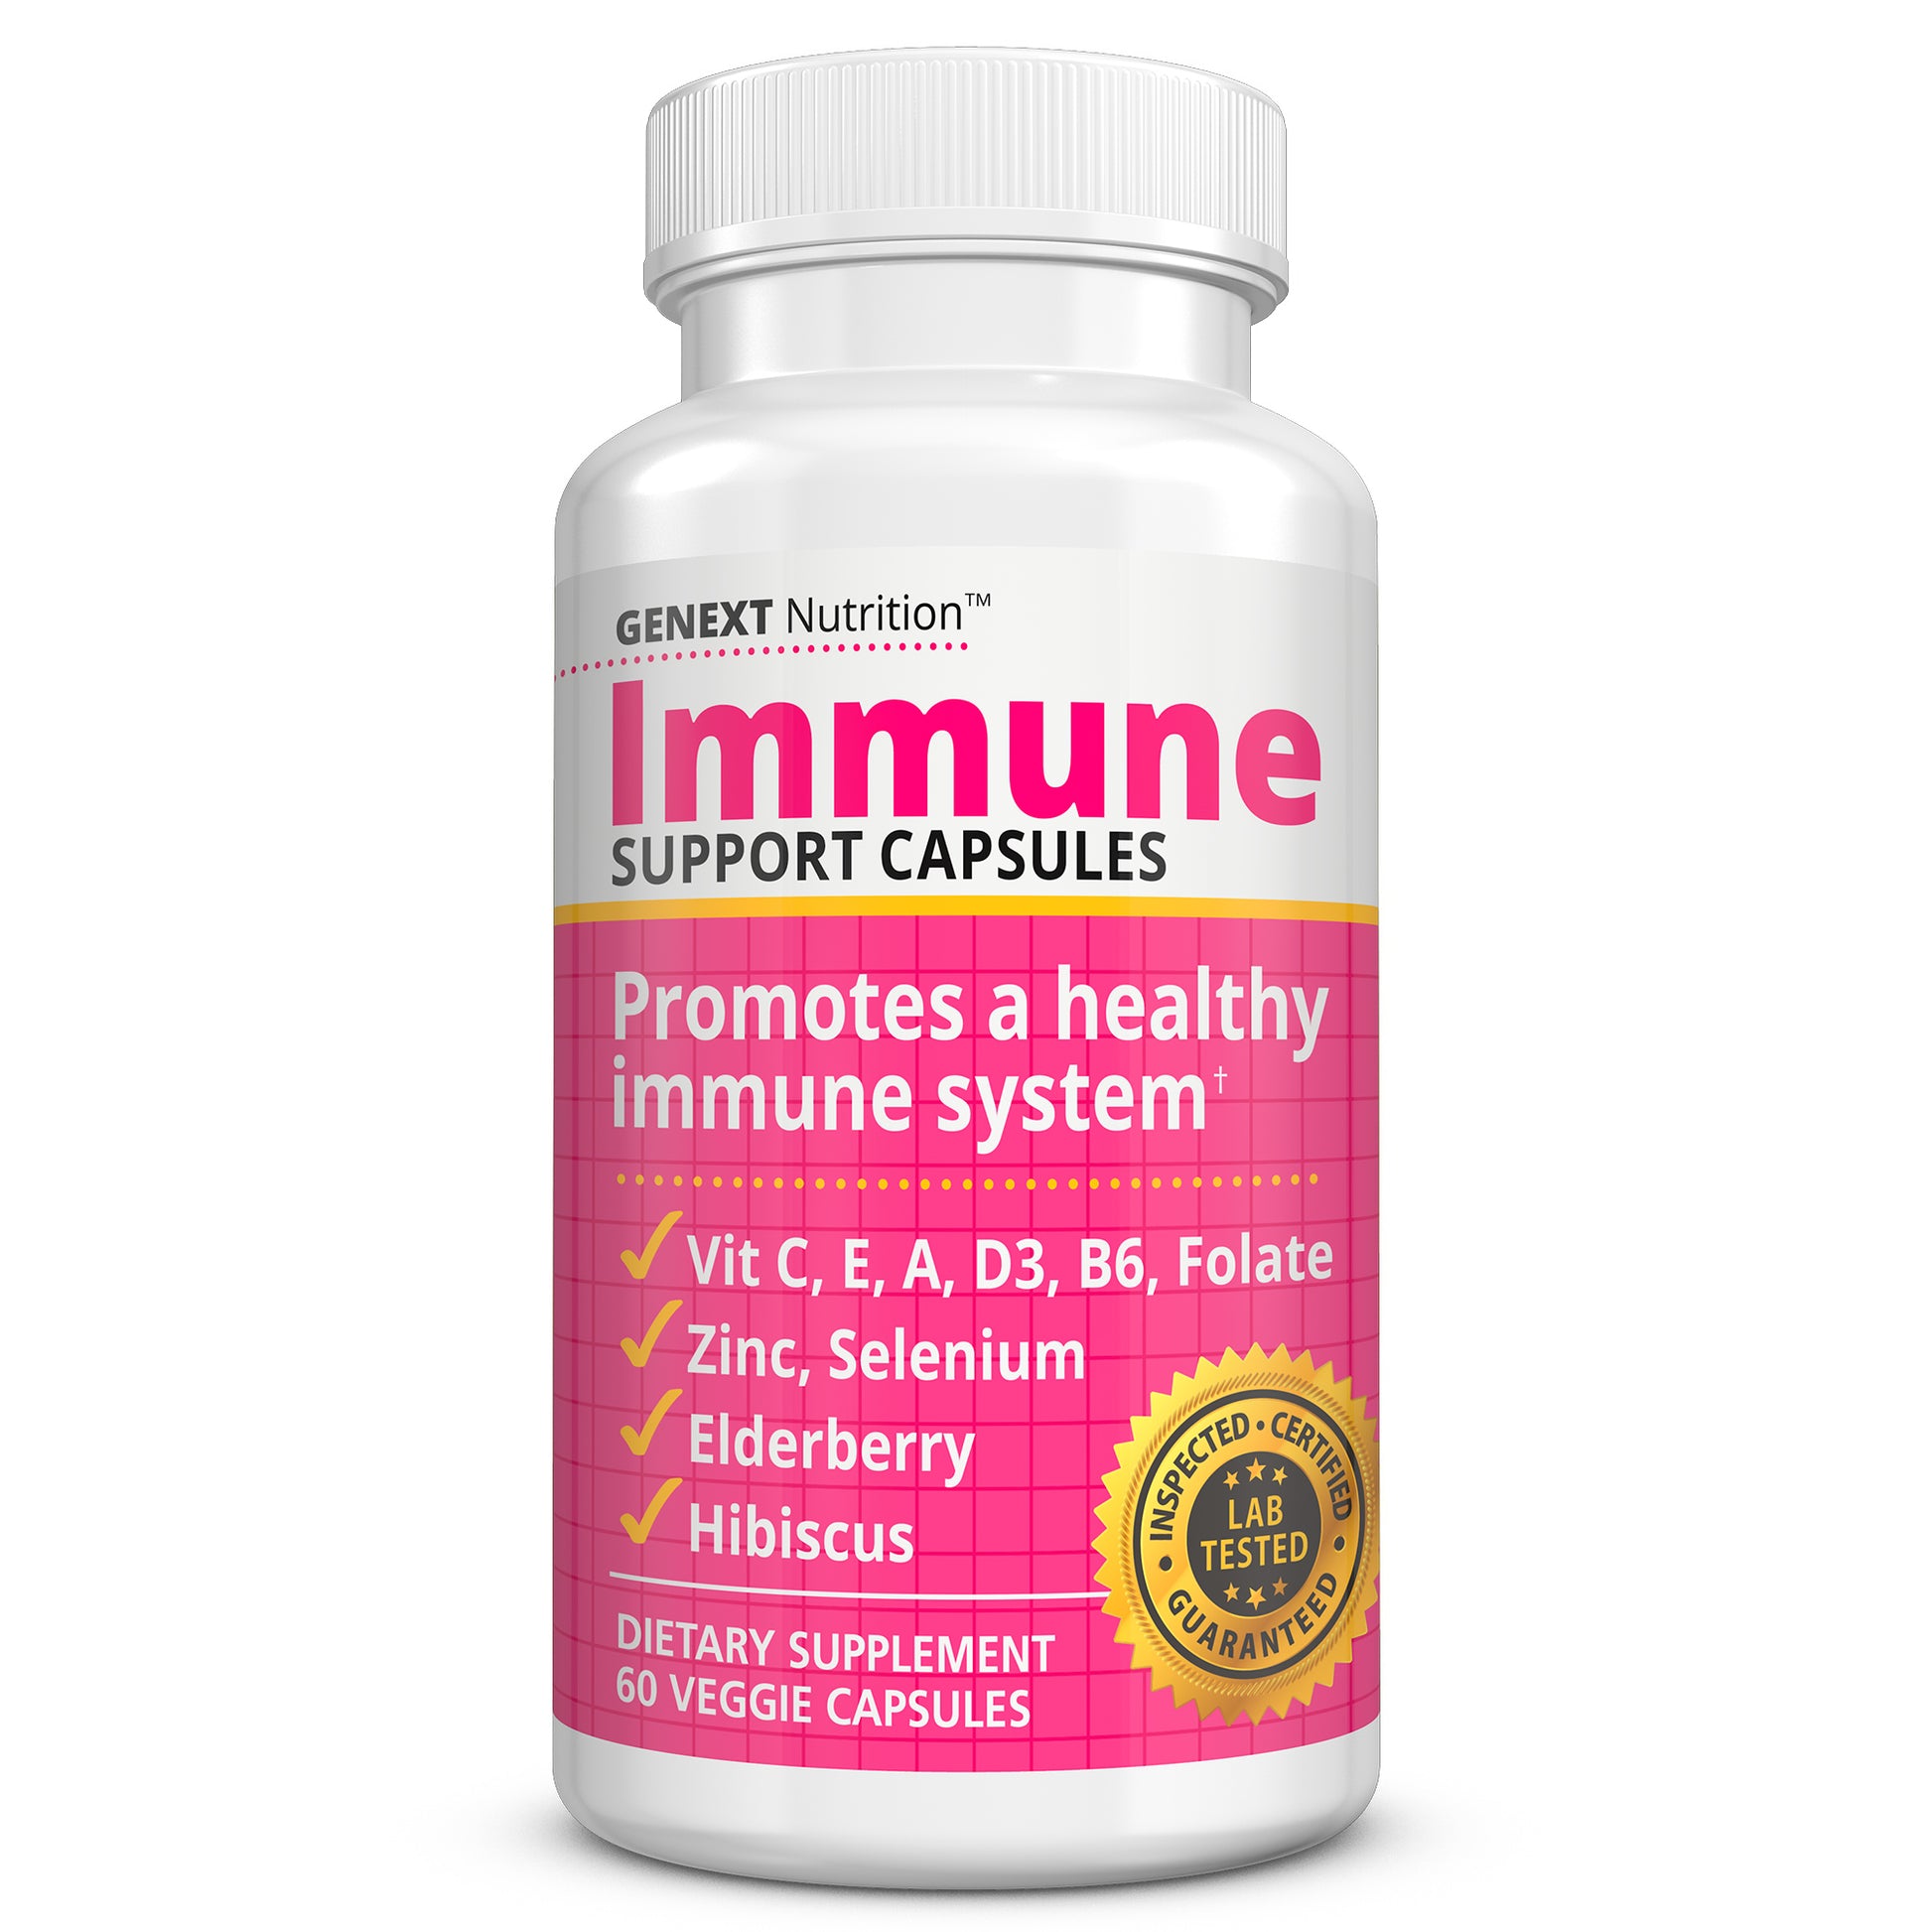 Immune Support Capsules, promotes healthy immune system, via C, E, D3, B6, Folate and Minerals.